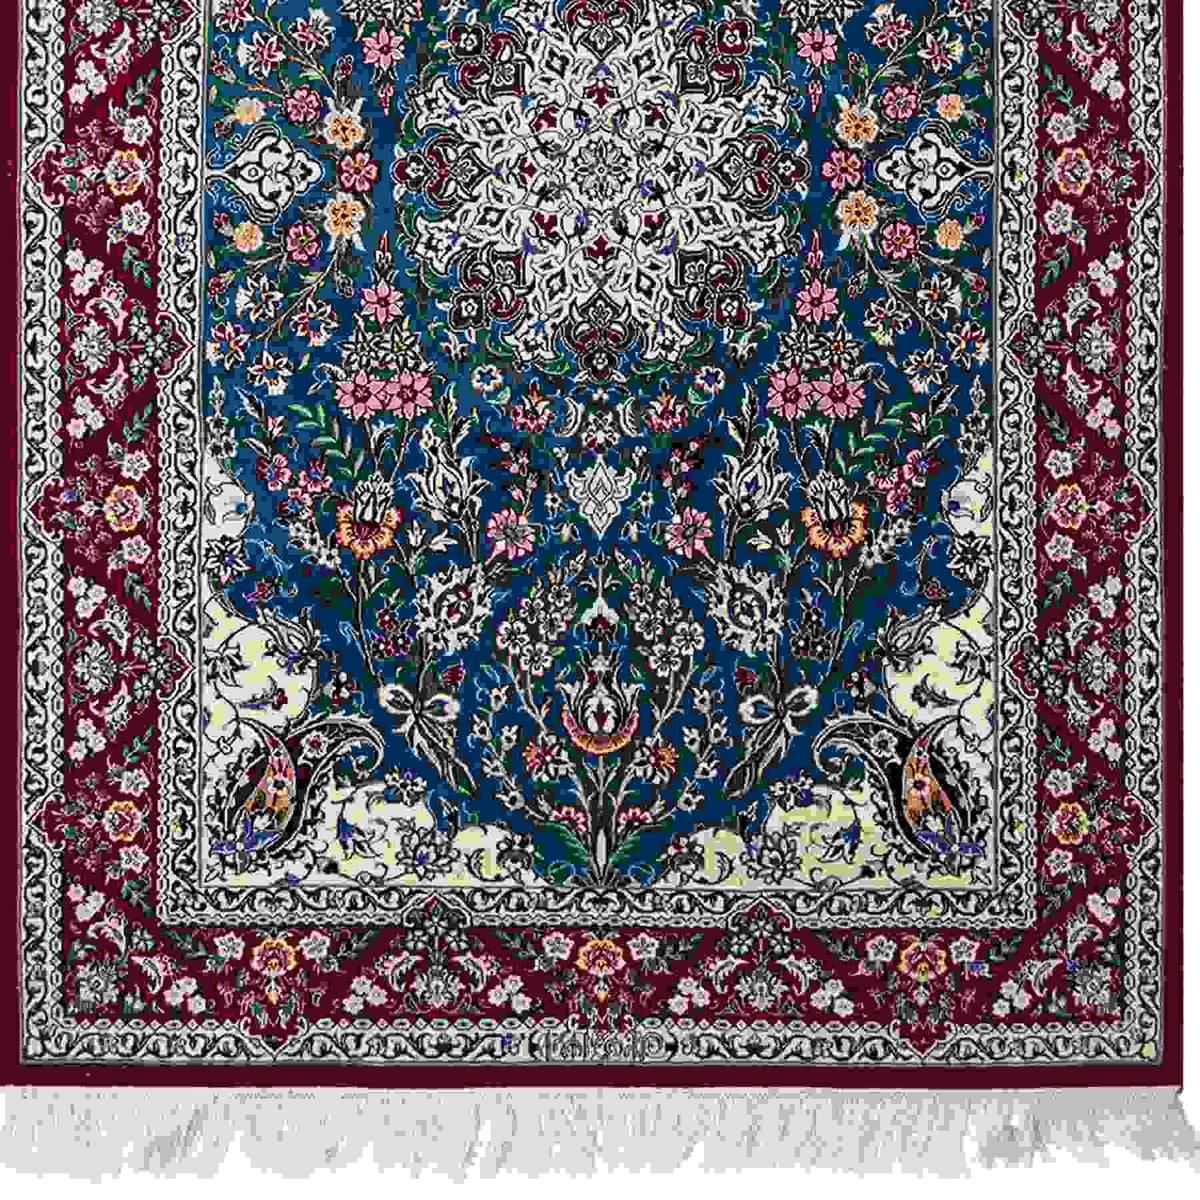 Super Fine Wool &amp; Silk Nain Persian Rug (SIGNED BY MASTER WEAVER)